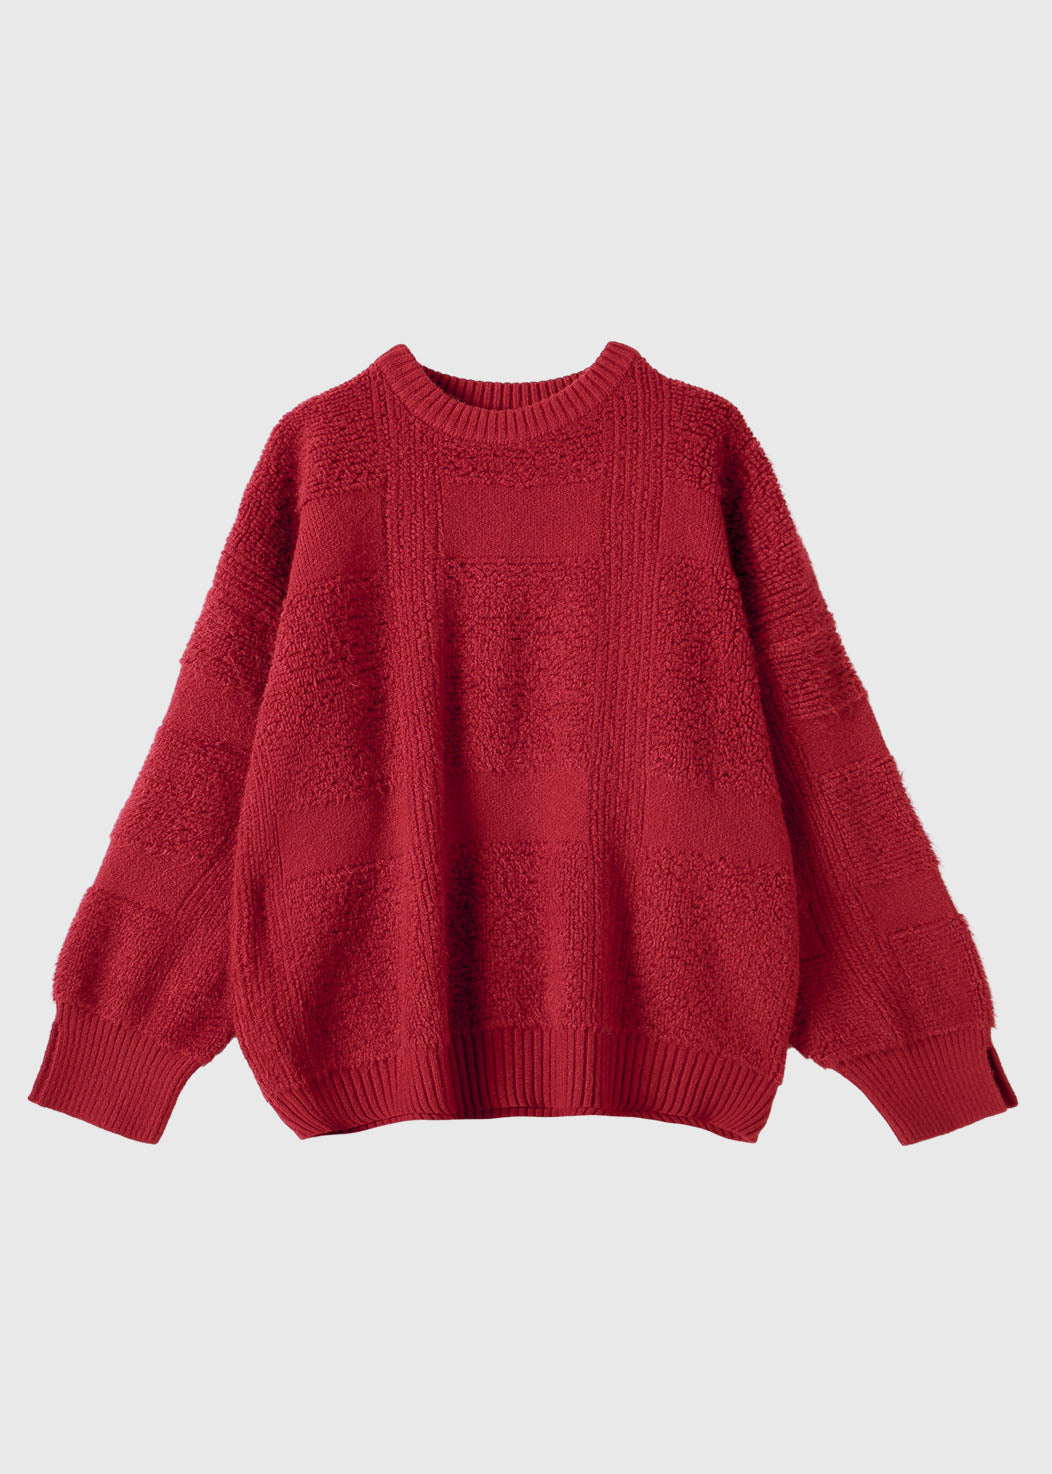 Fine Red O-Neck Patchwork Thick Cotton Knit Sweaters Long Sleeve